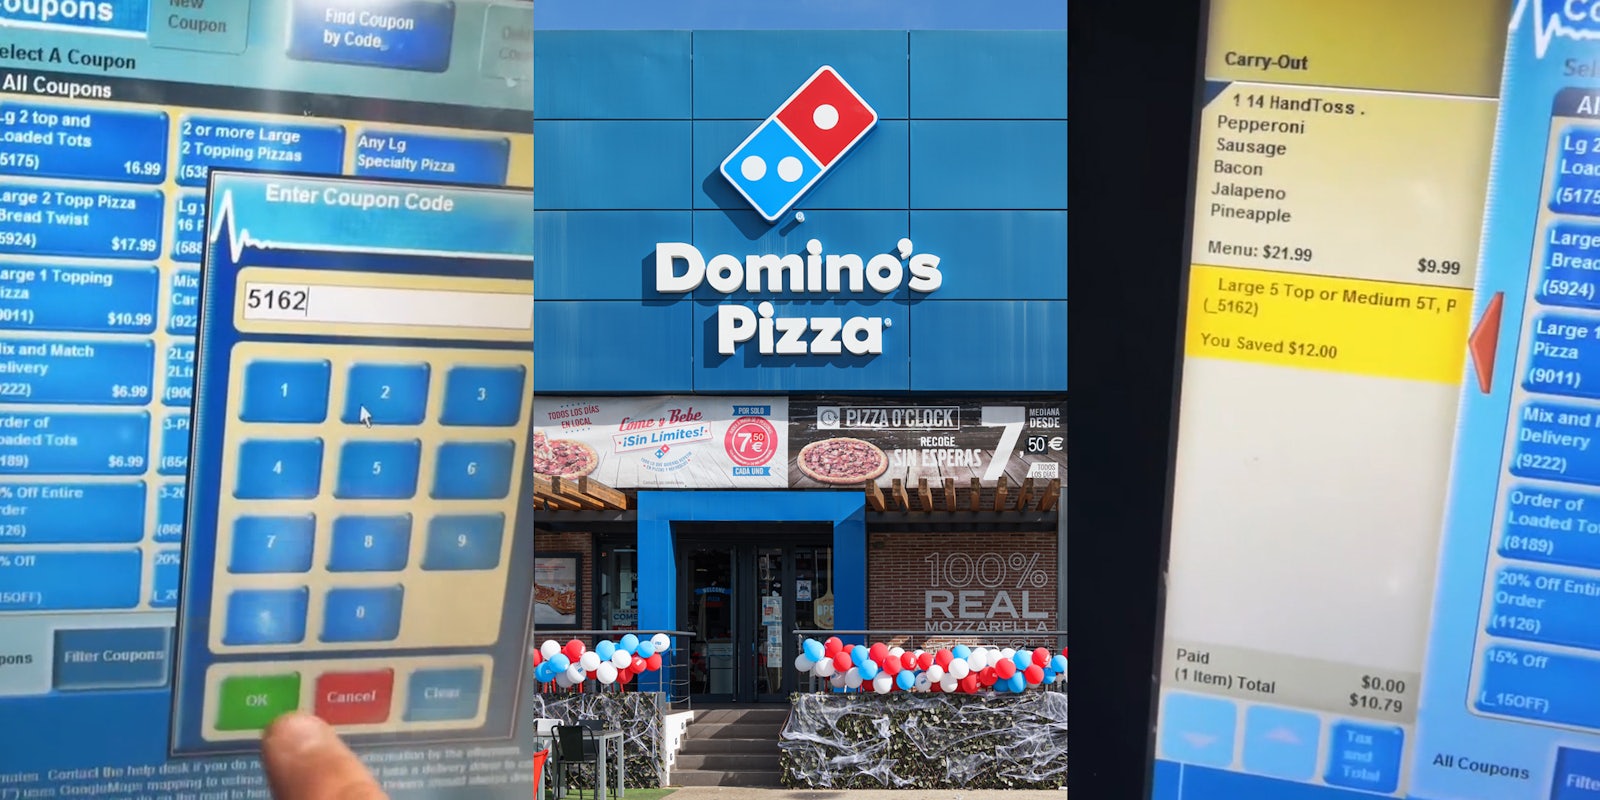 Domino's Worker Shares Coupon Code You Can Apply to Orders